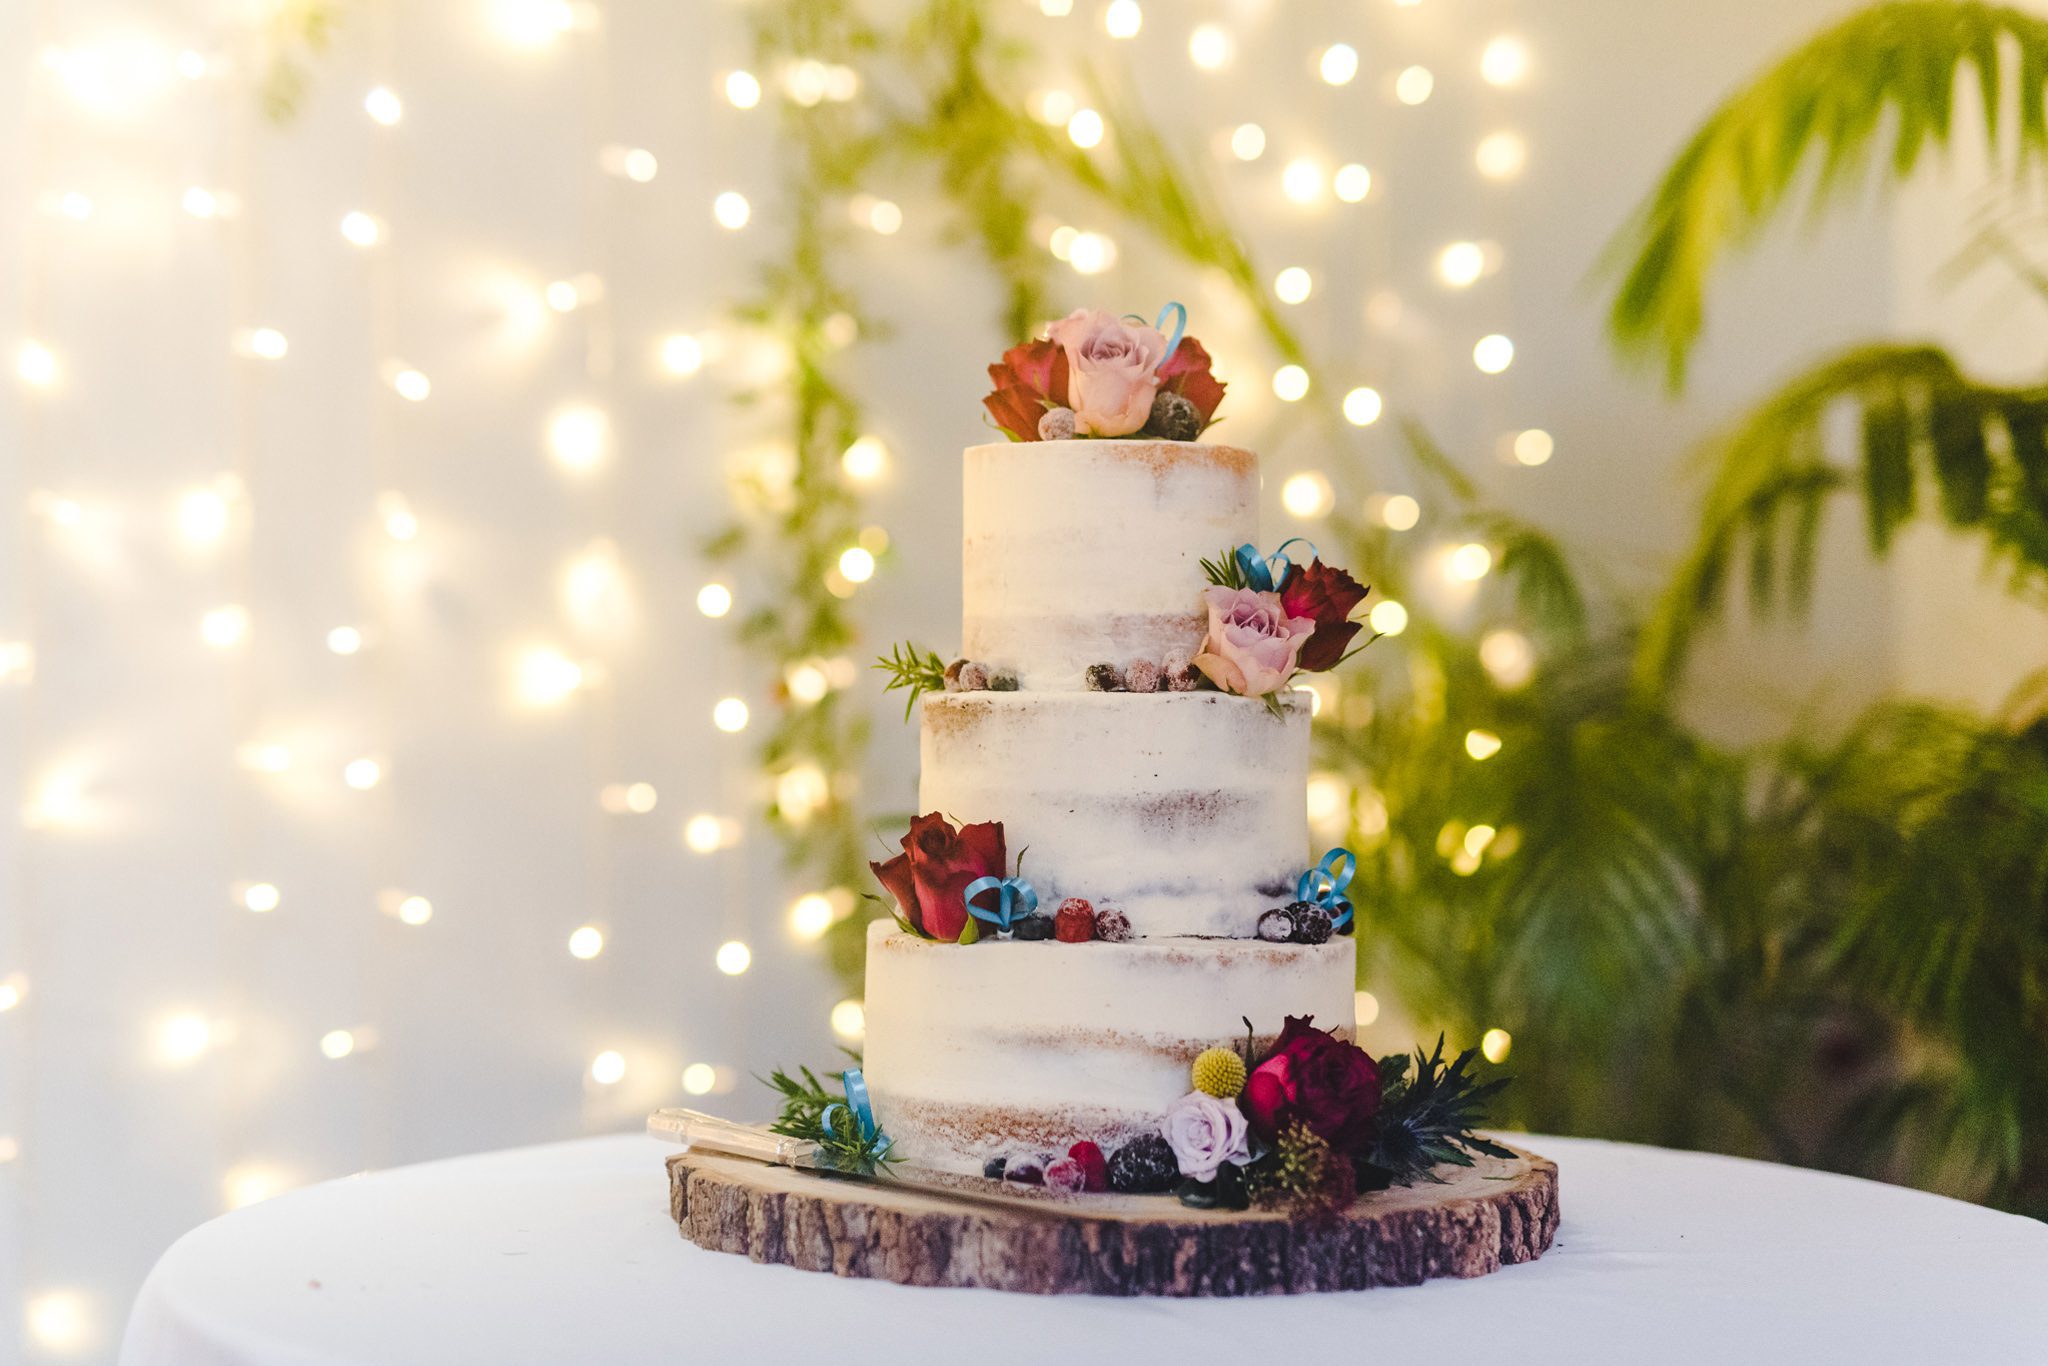 Wedding cake on a table with fairy lights